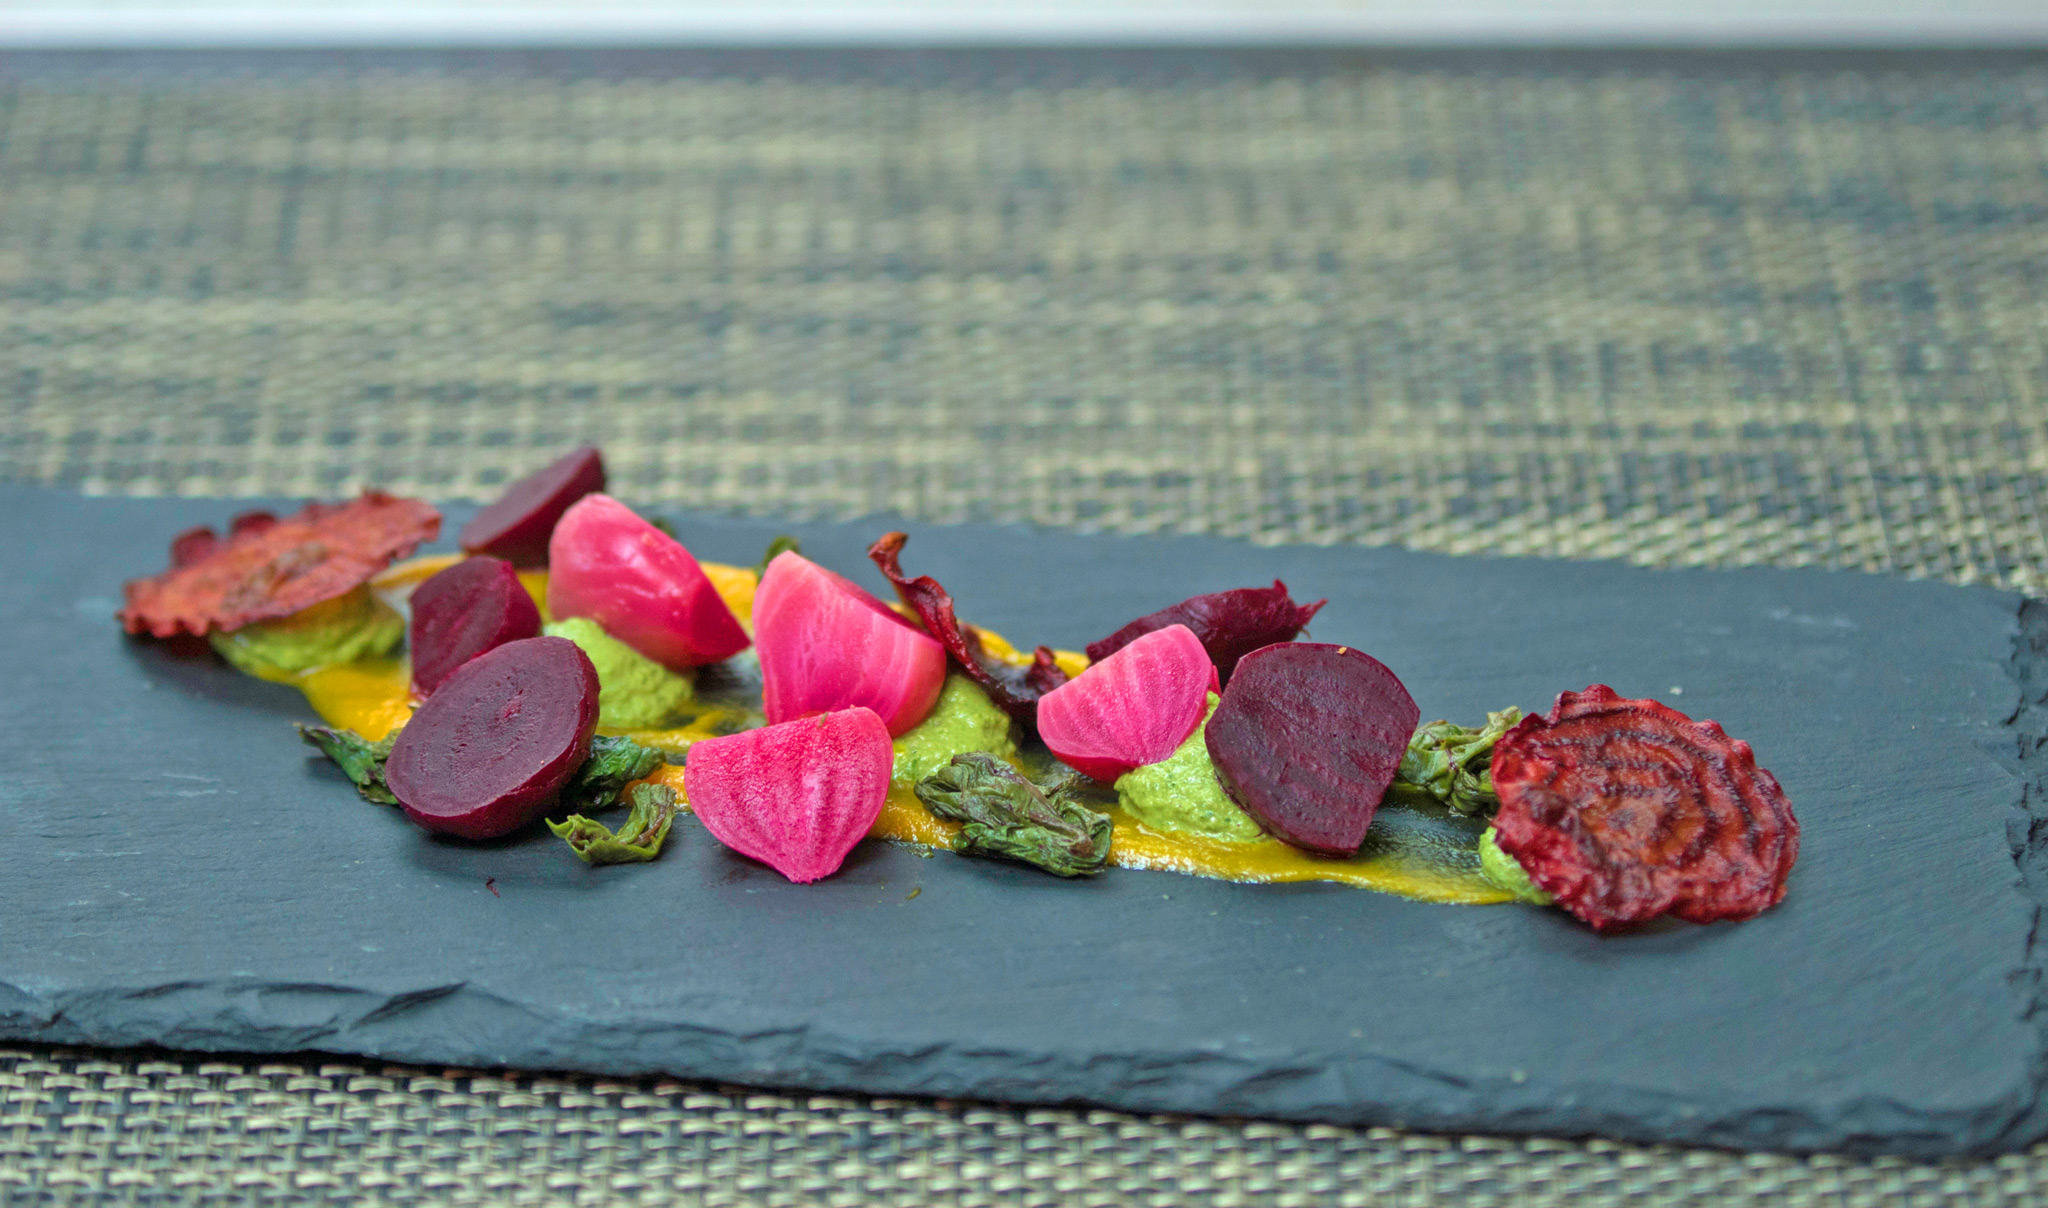 Beets - bulbs and greens, roasted fried and pickled, house pesto, blood orange vin